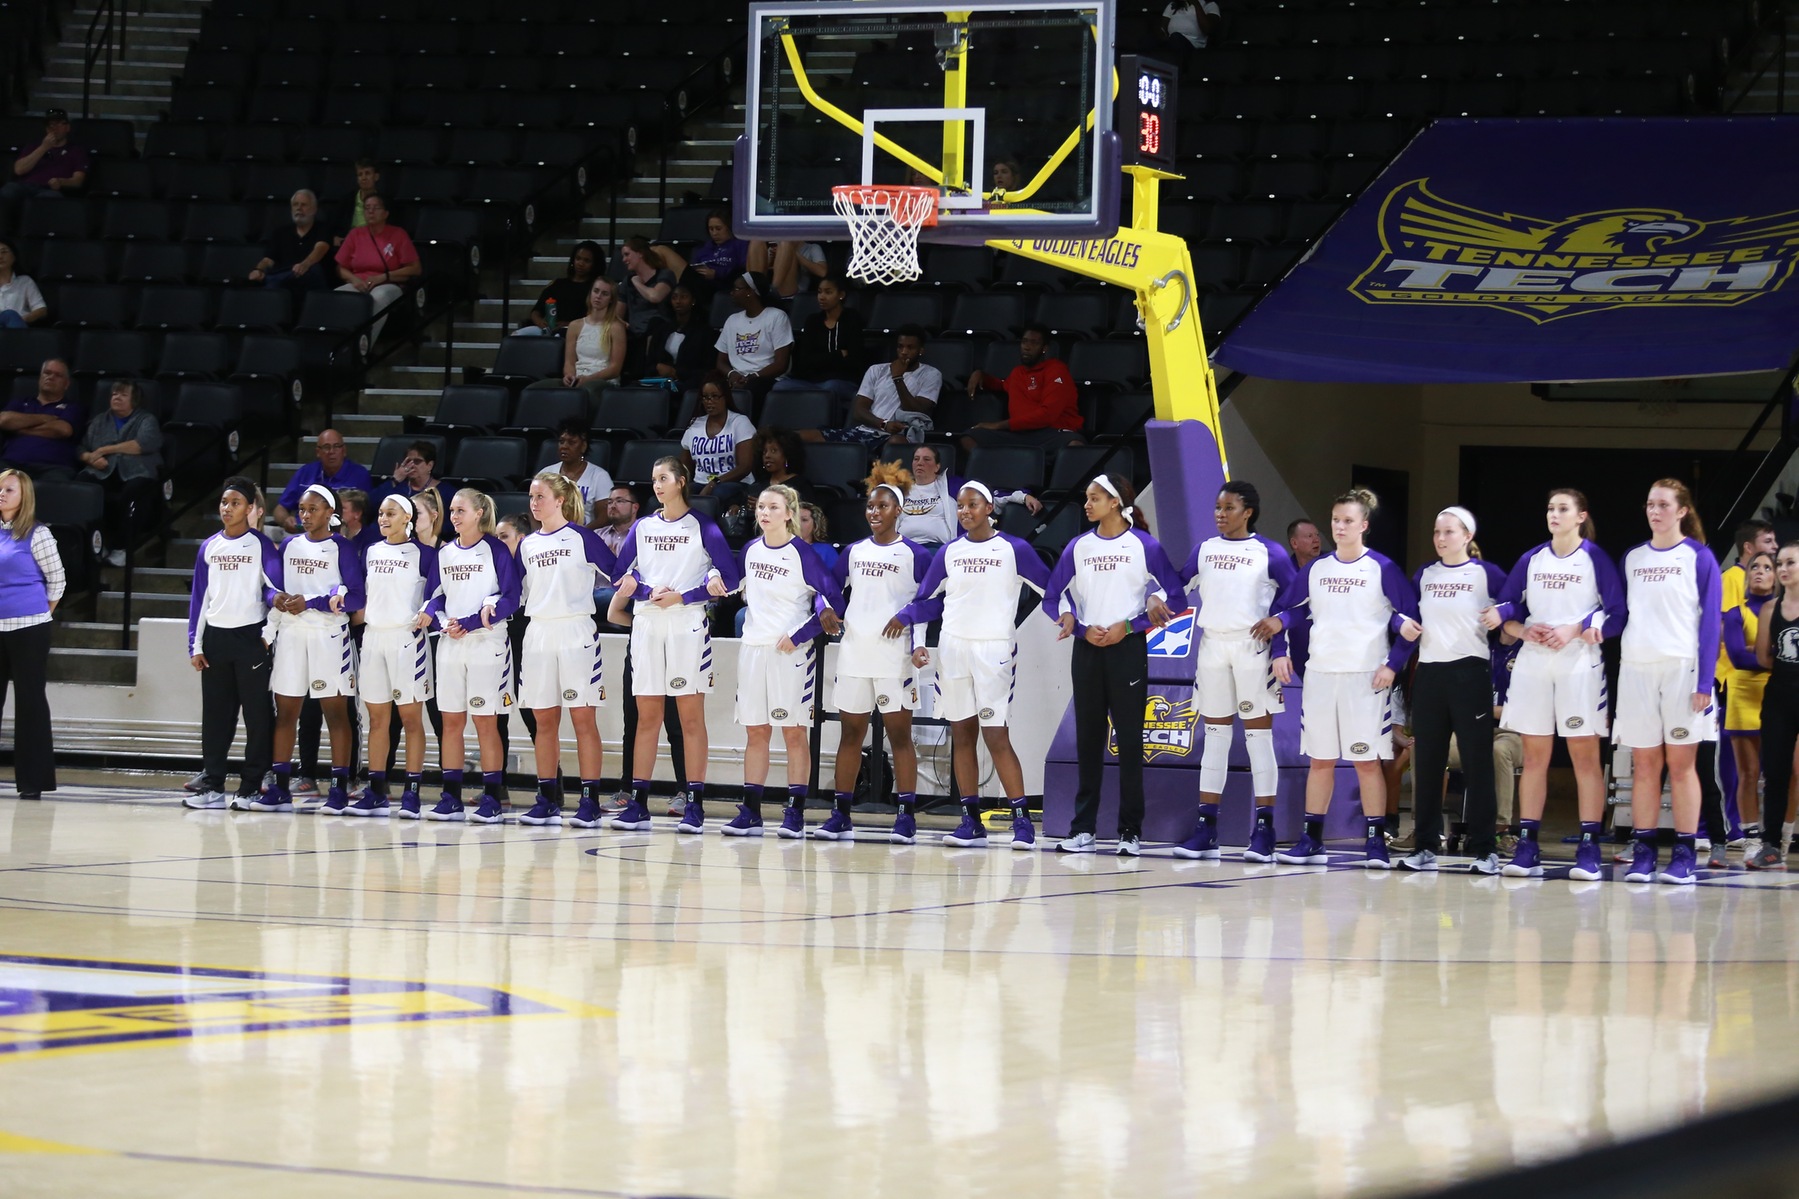 Tech women's basketball to hold first Education Day on Dec. 19 versus Winthrop